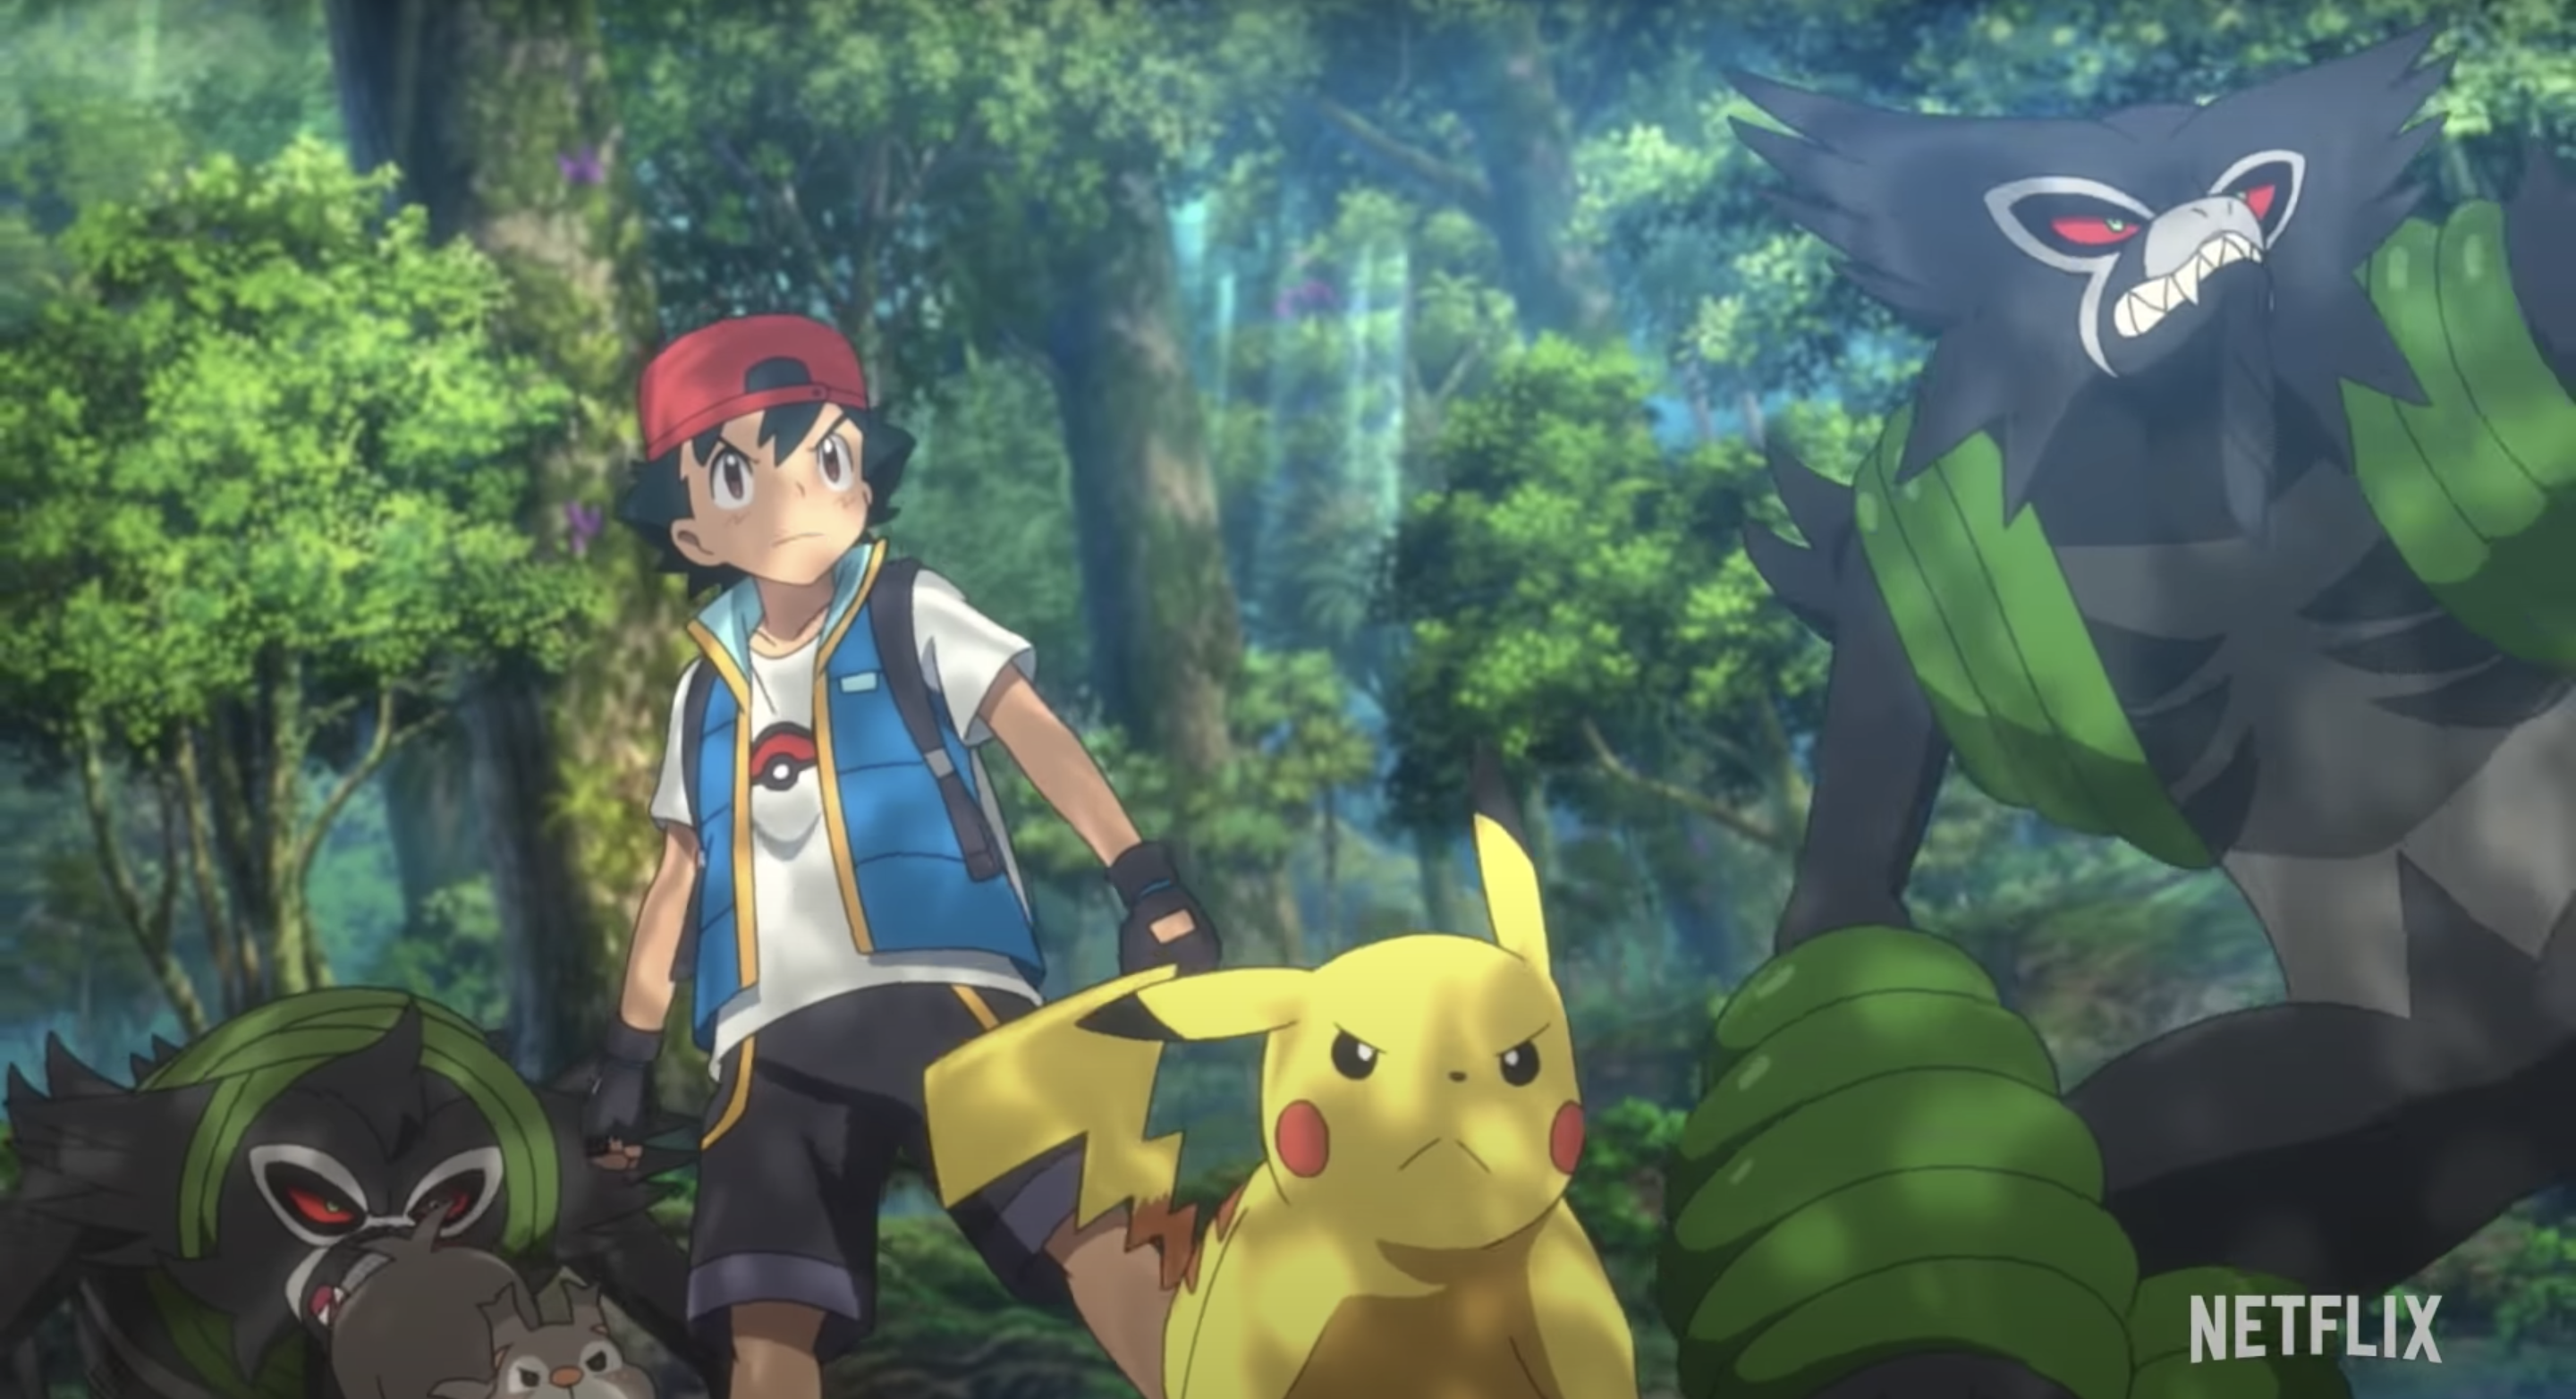 Online Pokémon Escape Game Launches in Promotion of Pokémon the Movie:  Secrets of the Jungle Anime Film, MOSHI MOSHI NIPPON